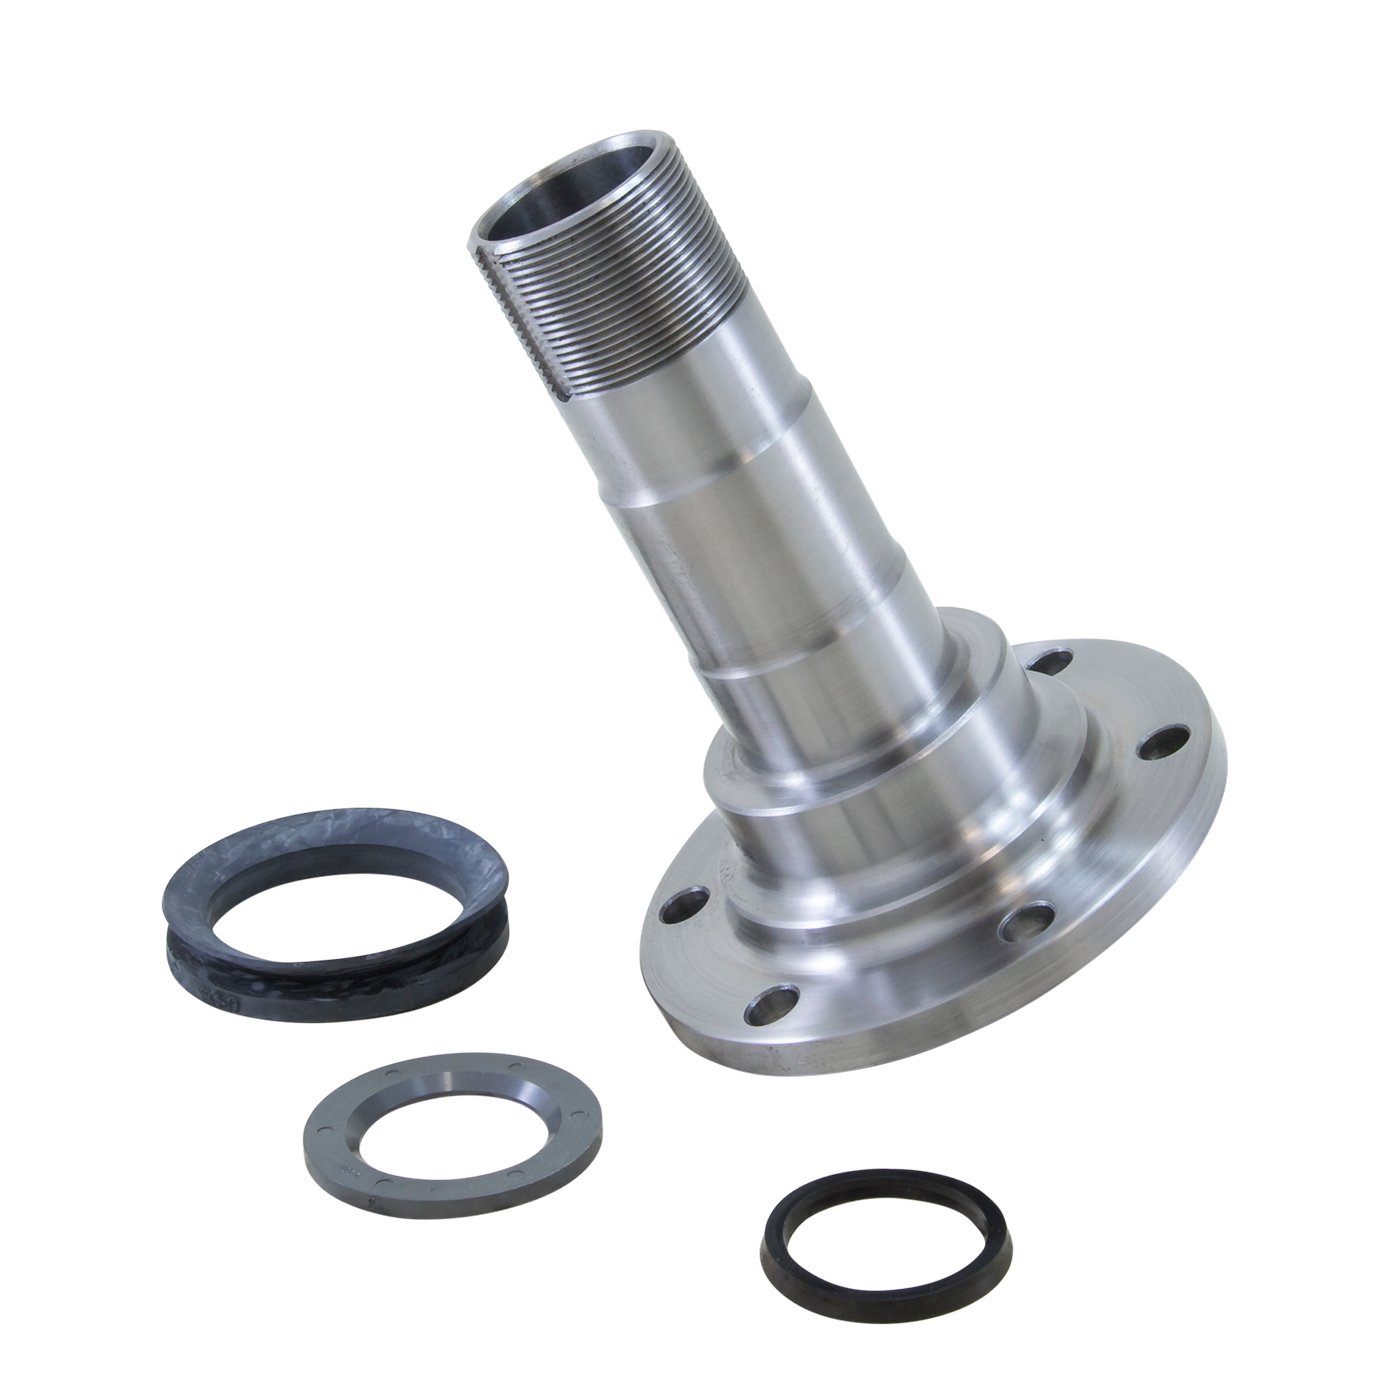 Replacement Front Spindle For Dana 44, GM